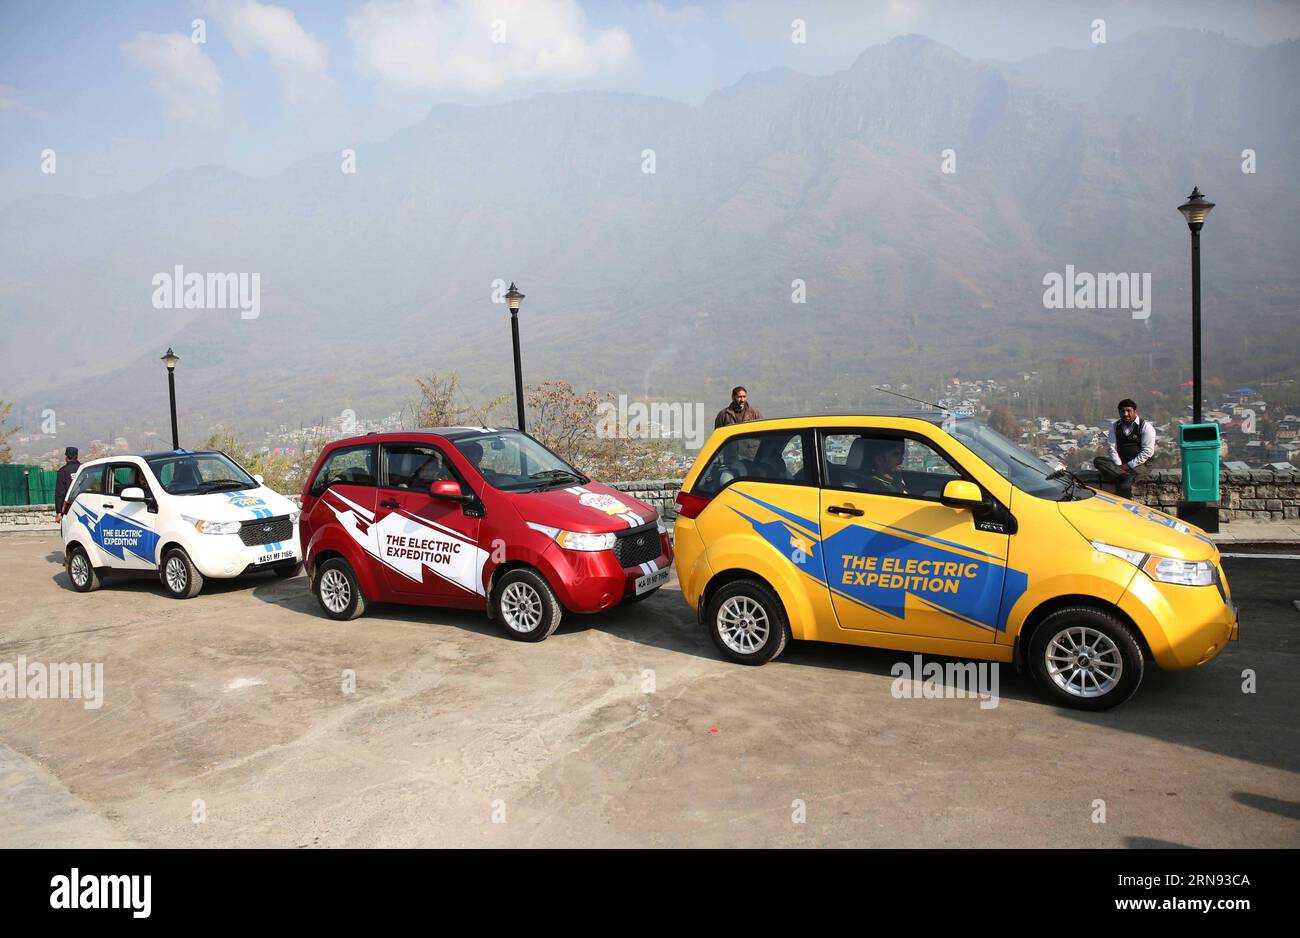 SRINAGAR,  Electric cars are ready to set out during India s first all-electric car expedition in Srinagar, summer capital of Indian-controlled Kashmir, Nov. 16, 2015. The first all-electric car expedition organized by Mahindra Reva Electric Vehicles Pvt Limited from Kashmir to Kanyakumari will cover a distance of over 5000 kilometers across 52 locations over a month. ) KASHMIR-SRINAGAR-ELECTRIC CAR EXPEDITION JavedxDar PUBLICATIONxNOTxINxCHN   Srinagar Electric Cars are Ready to Set out during India S First All Electric Car Expedition in Srinagar Summer Capital of Indian Controlled Kashmir No Stock Photo